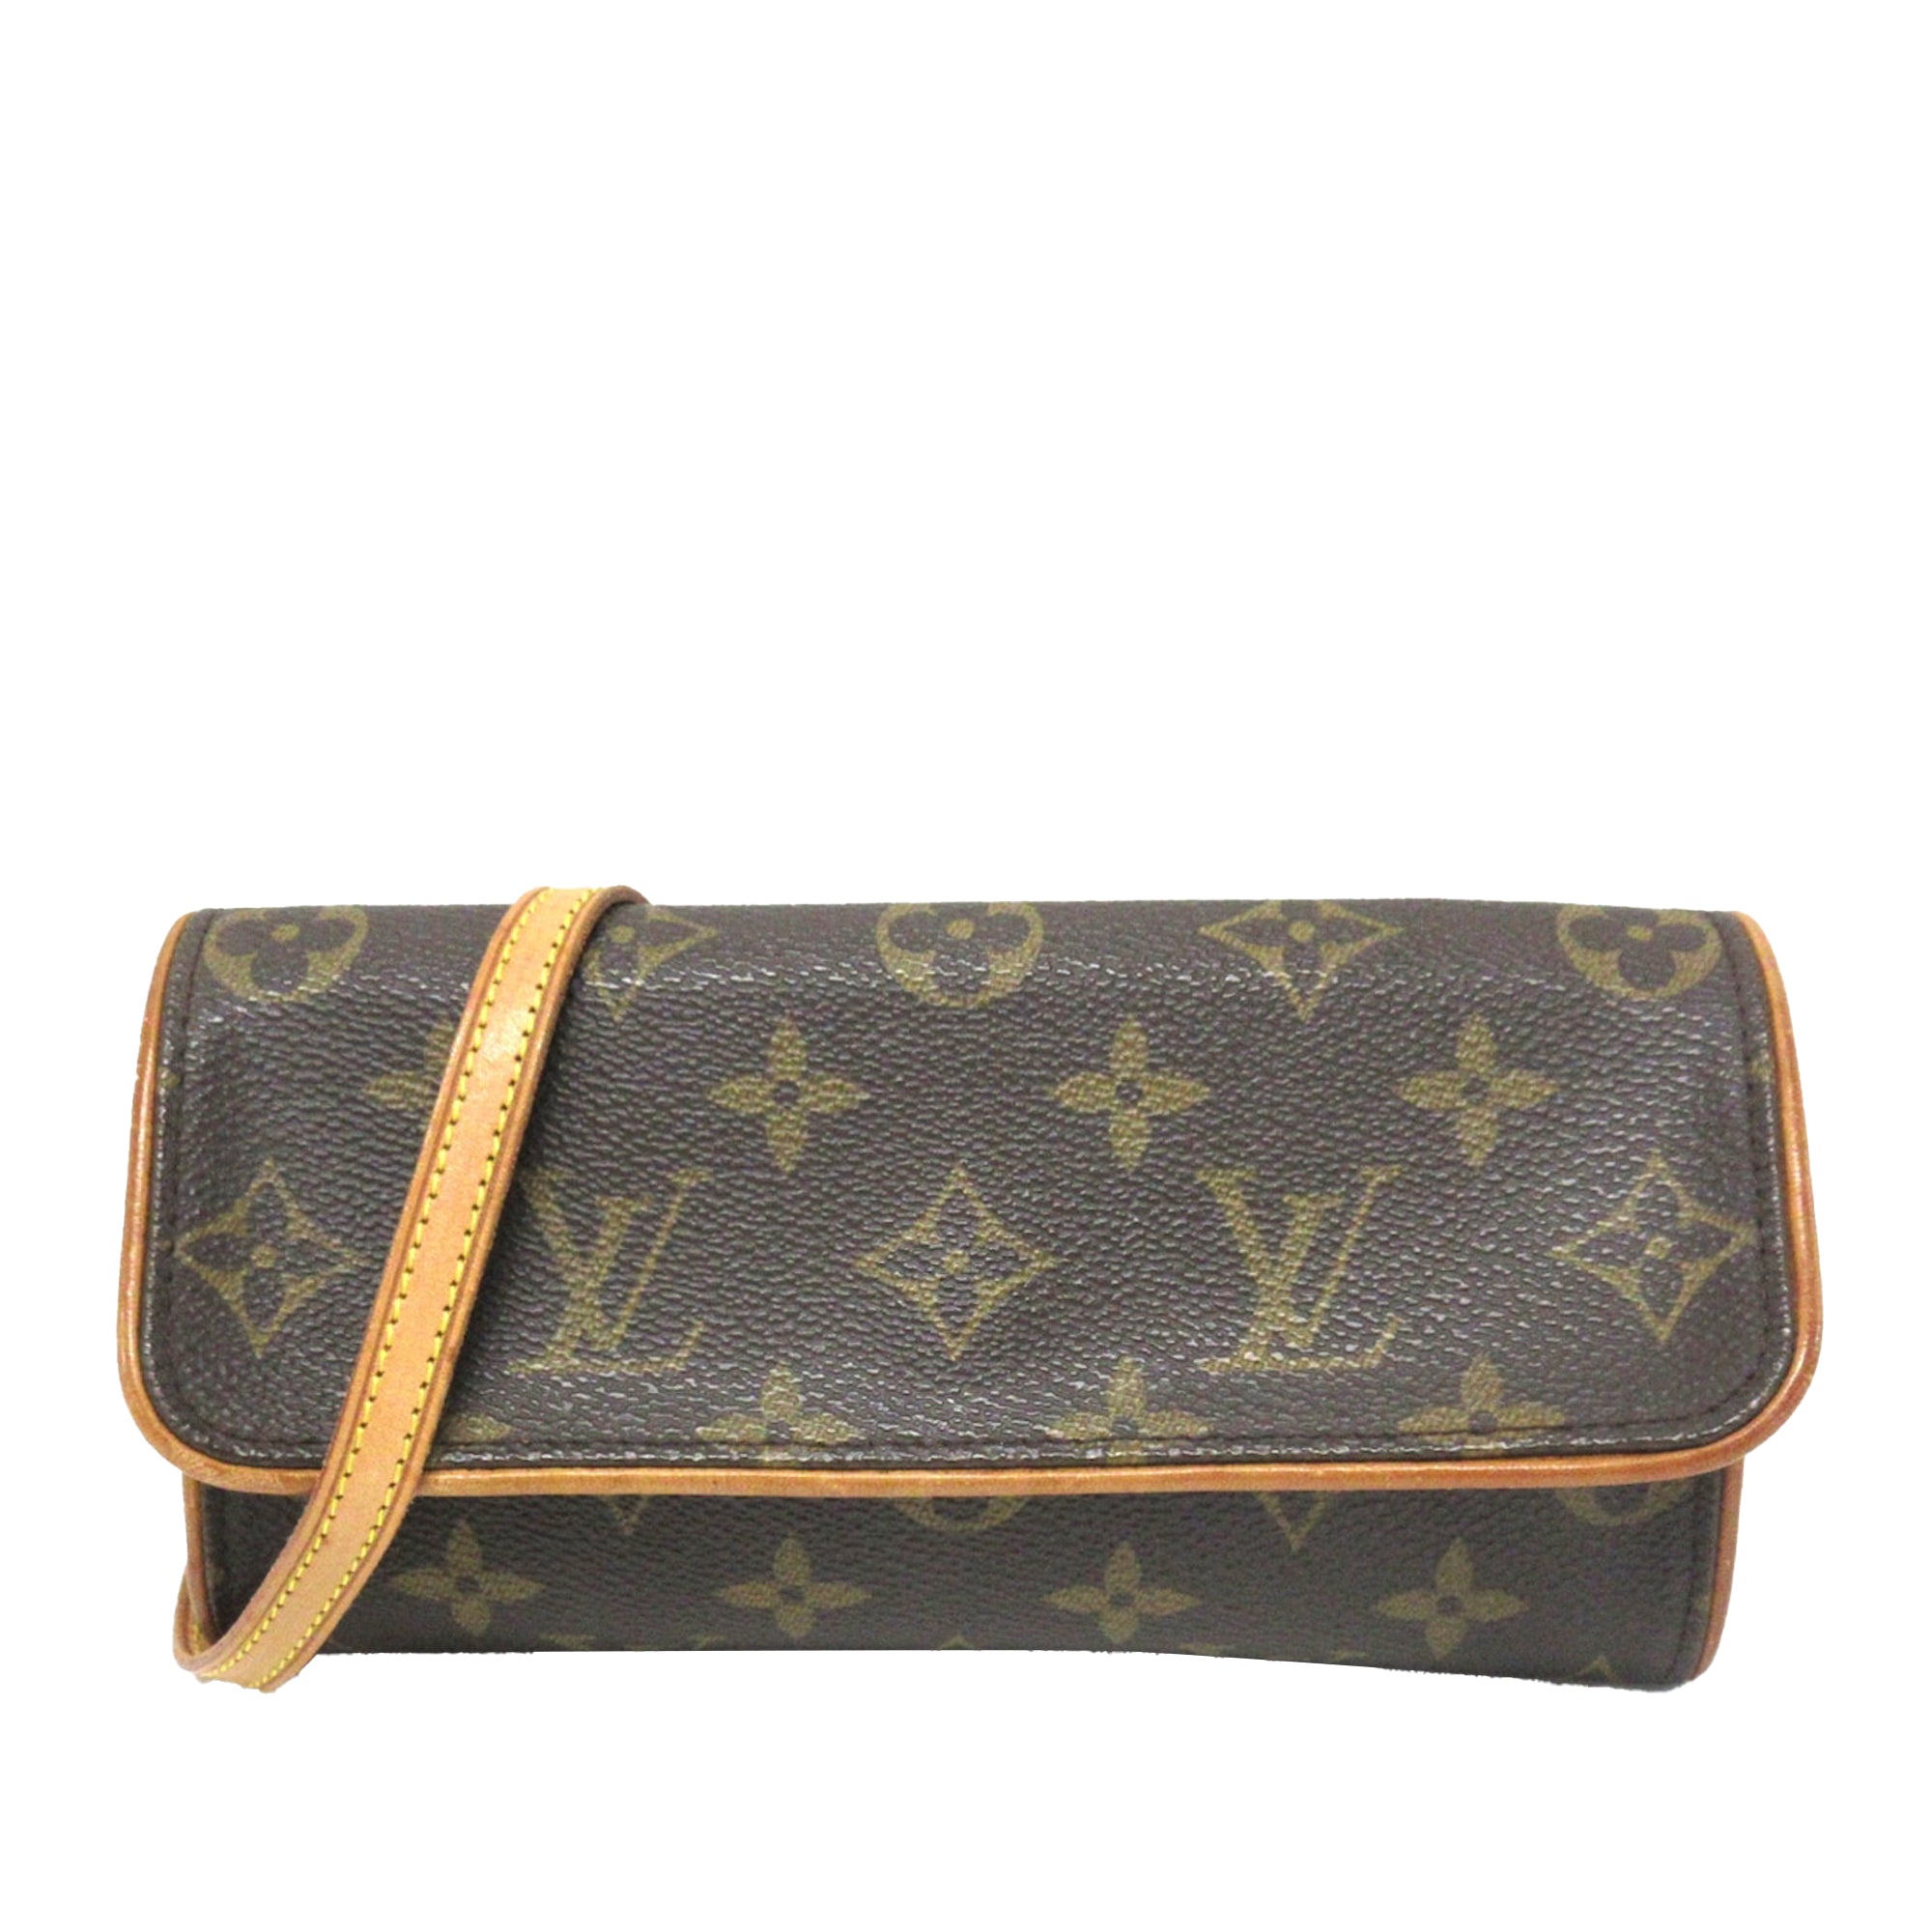 Louis Vuitton pre-owned Hampstead PM tote bag